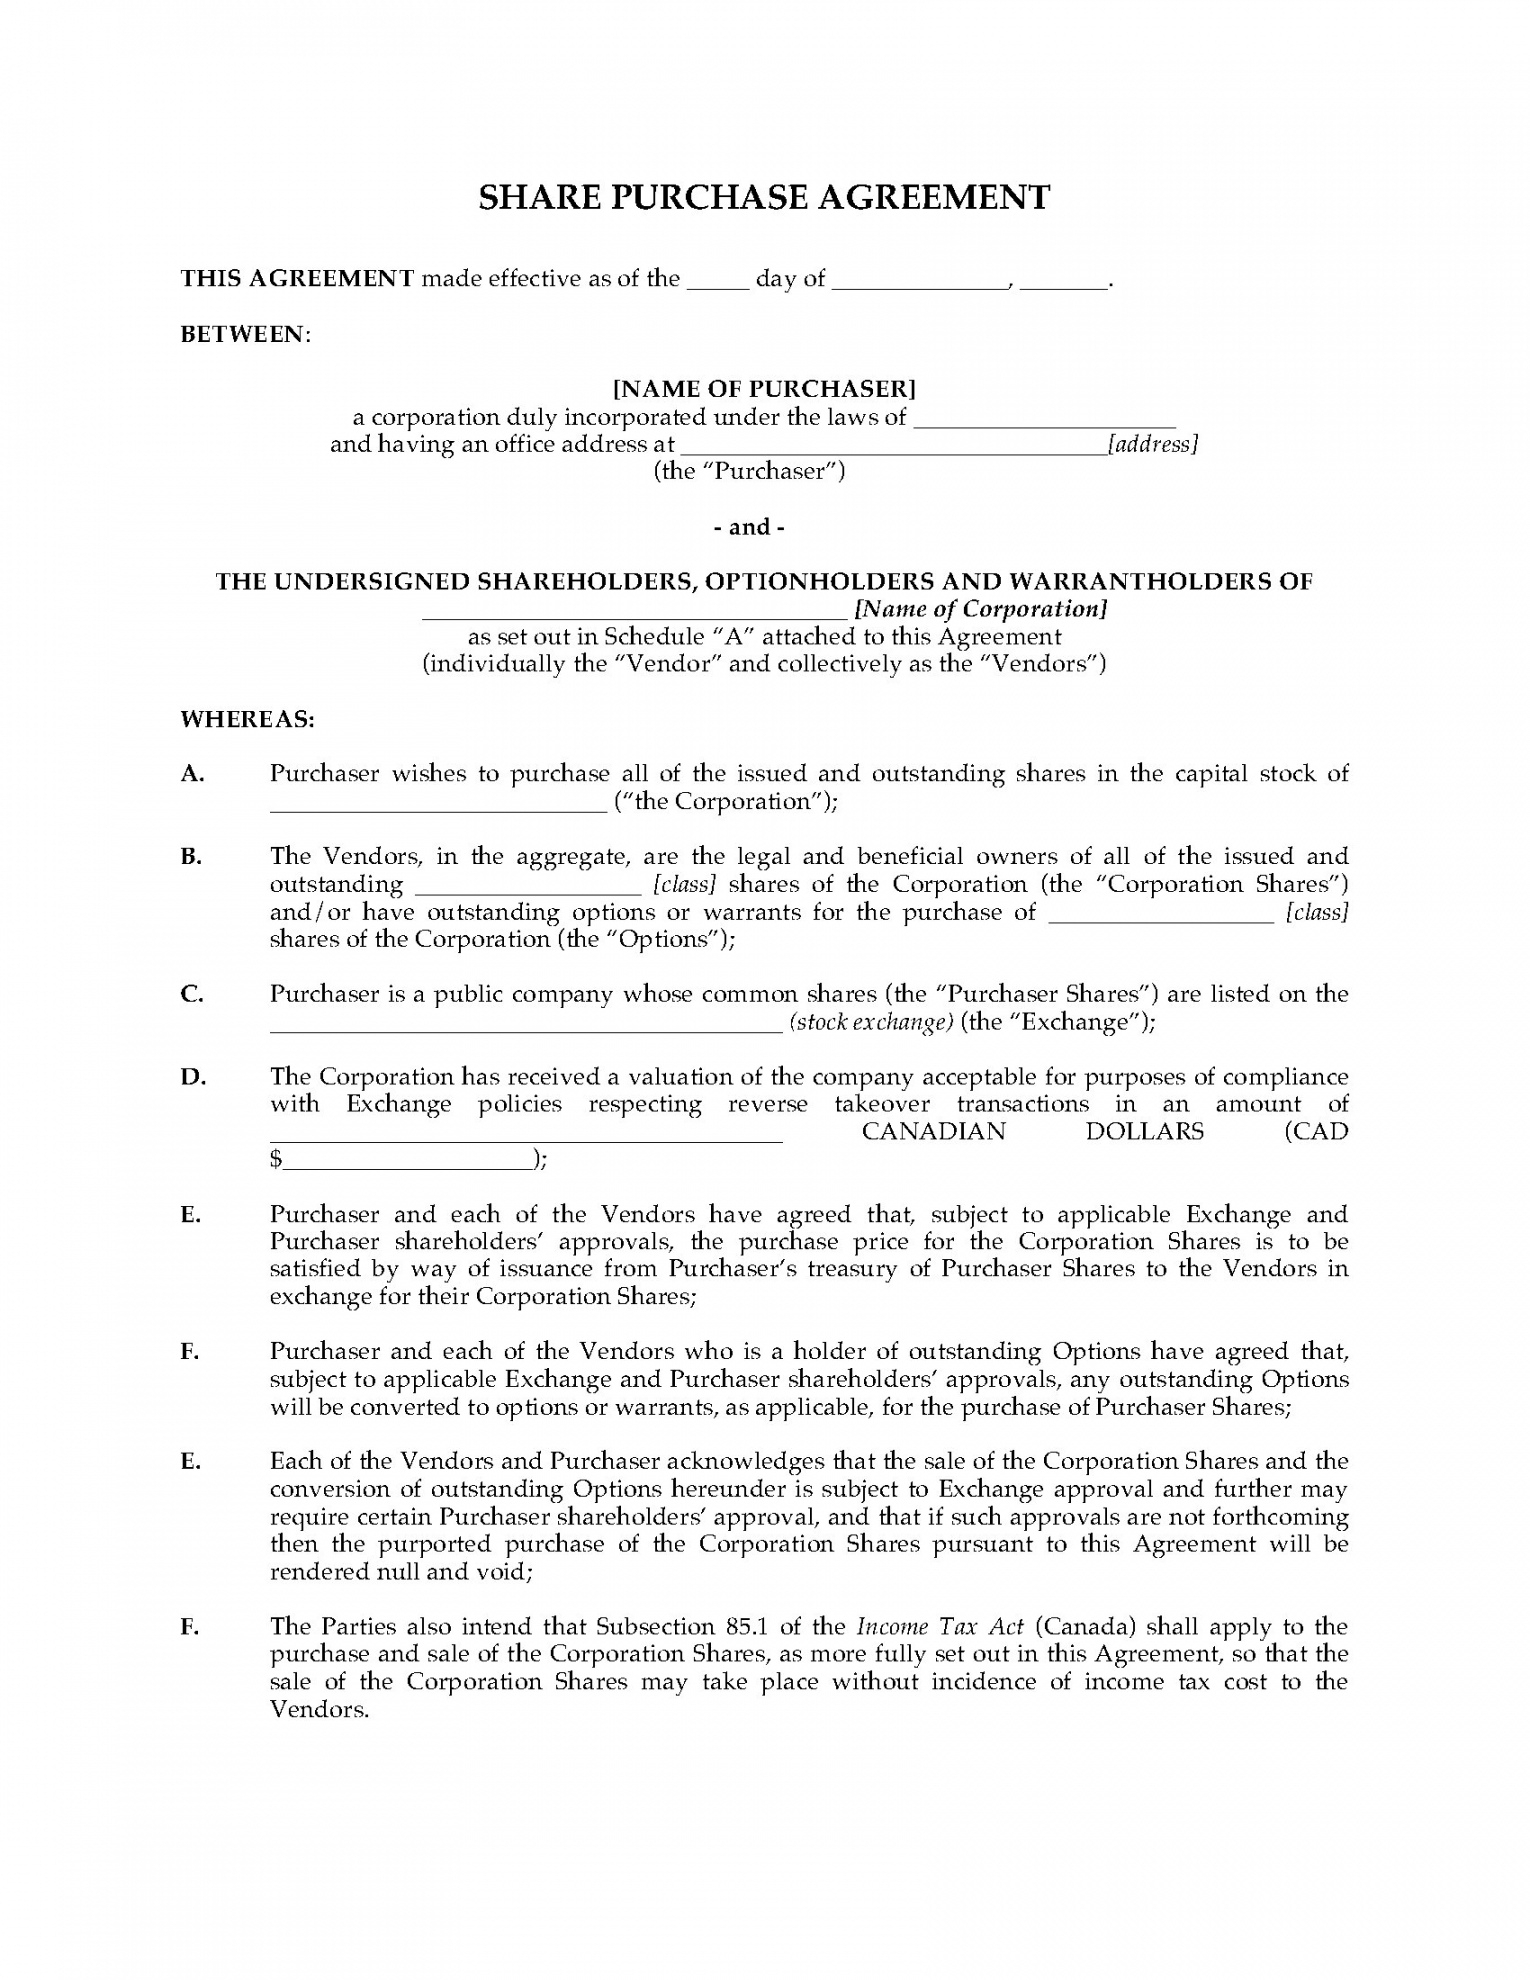 Sample Agreement For Takeover Of Business Editable Alberta Share Purchase Agreement For Reverse Takeover Legal